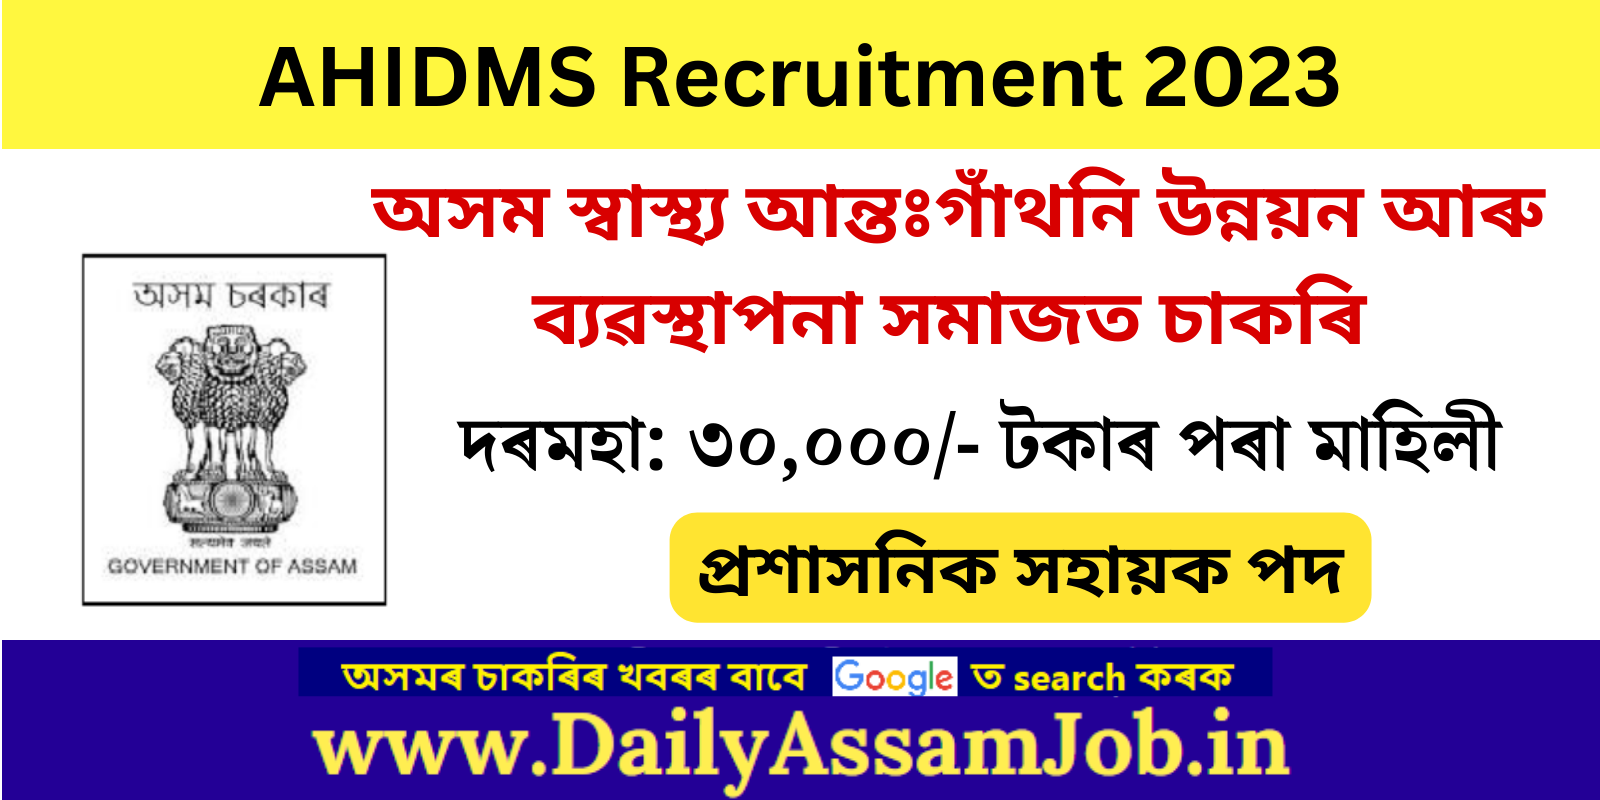 Apply for Administrative Assistant Post at AHIDMS